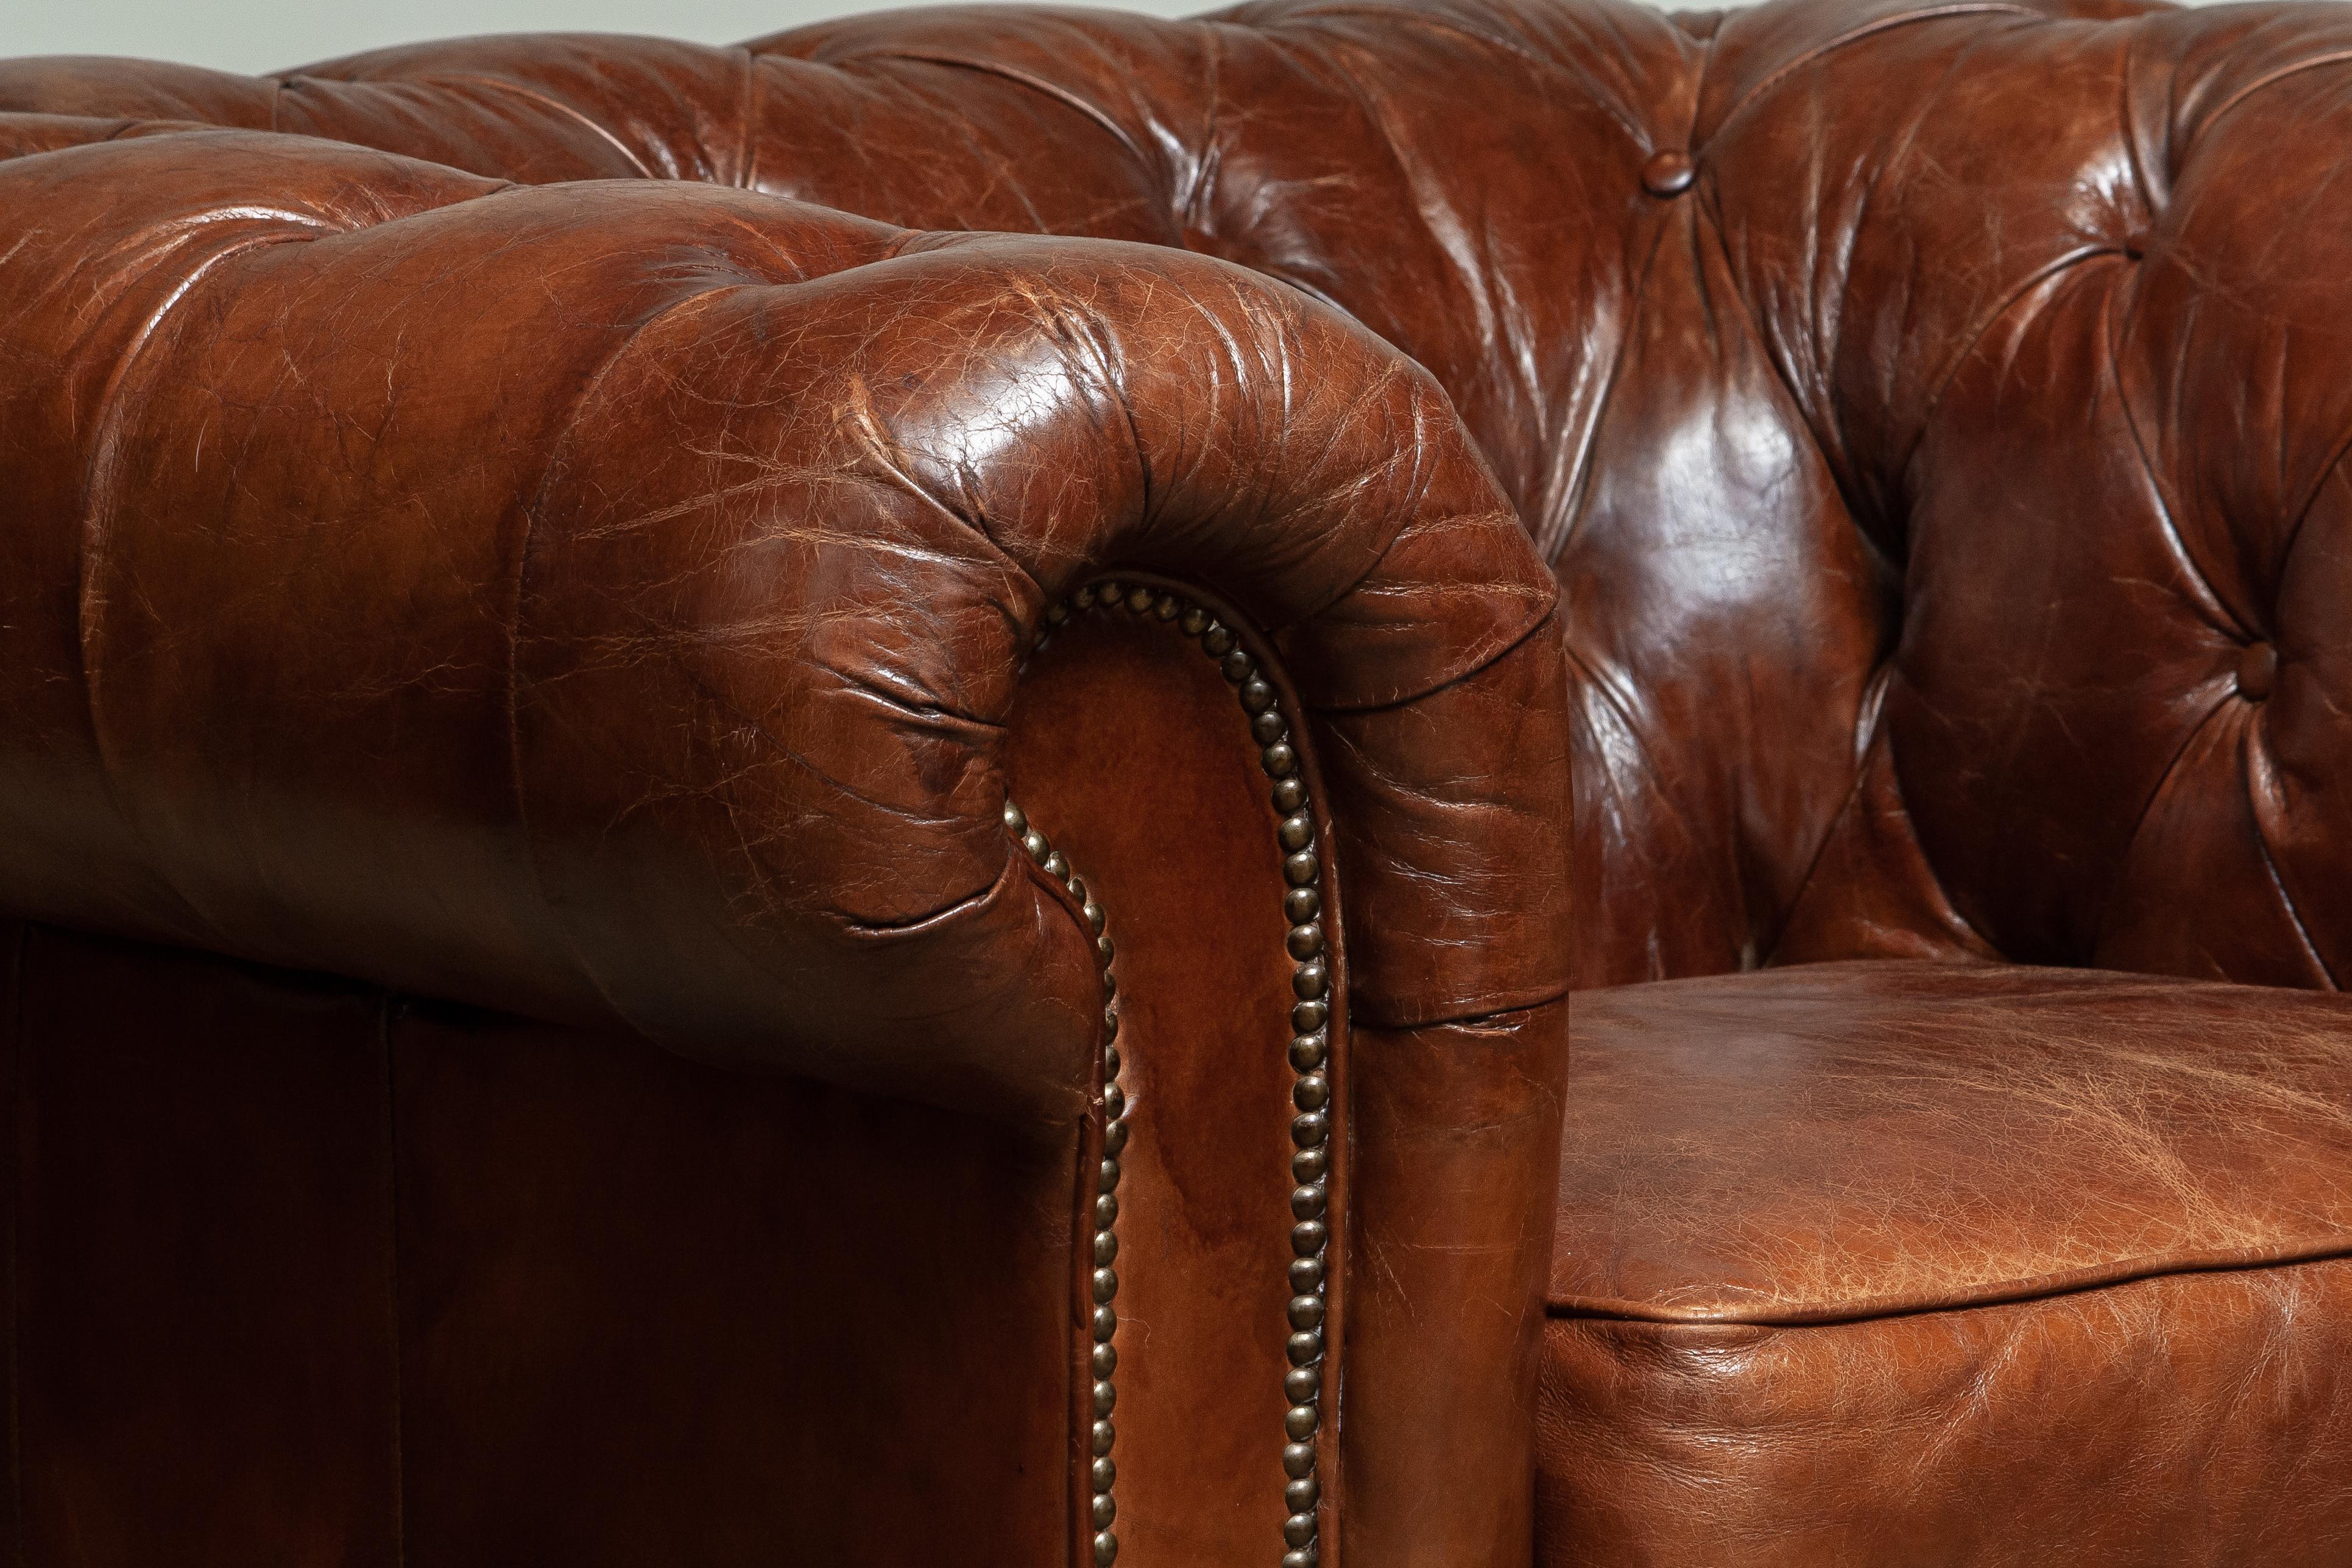 Chesterfield lounge / easy chair in chocolate brown leather with a beautiful patina true the years.
Underneath the seat cushion, filled with feather, is fully sprung therefor the seat is soft and comfortable.
The overall condition in good.
Note